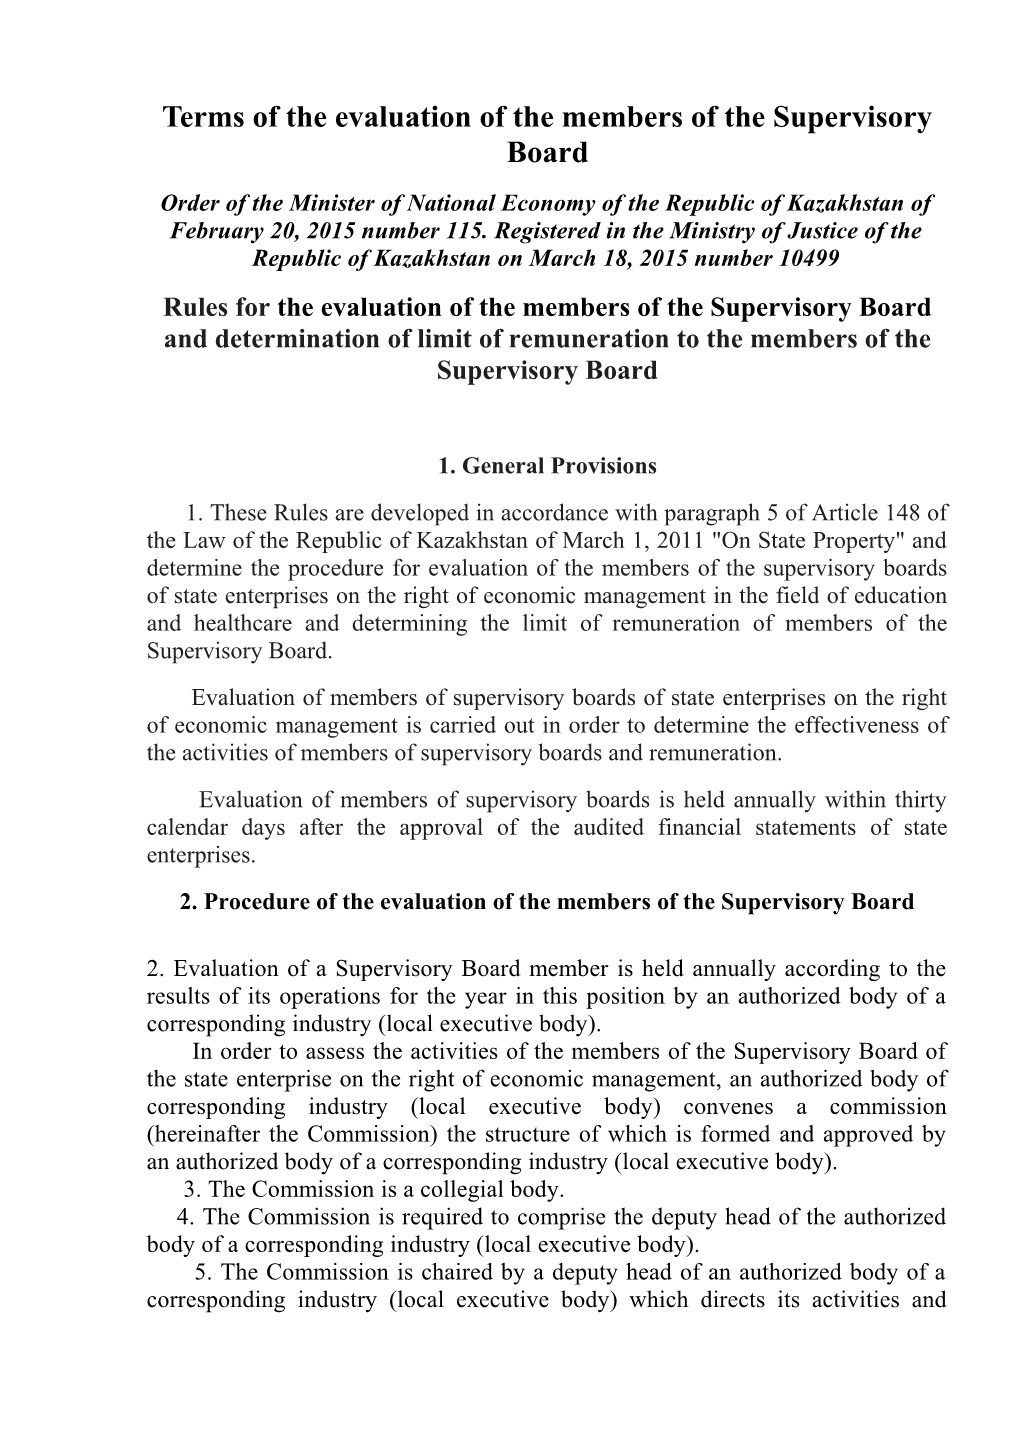 Terms of the Evaluation of the Members of the Supervisory Board